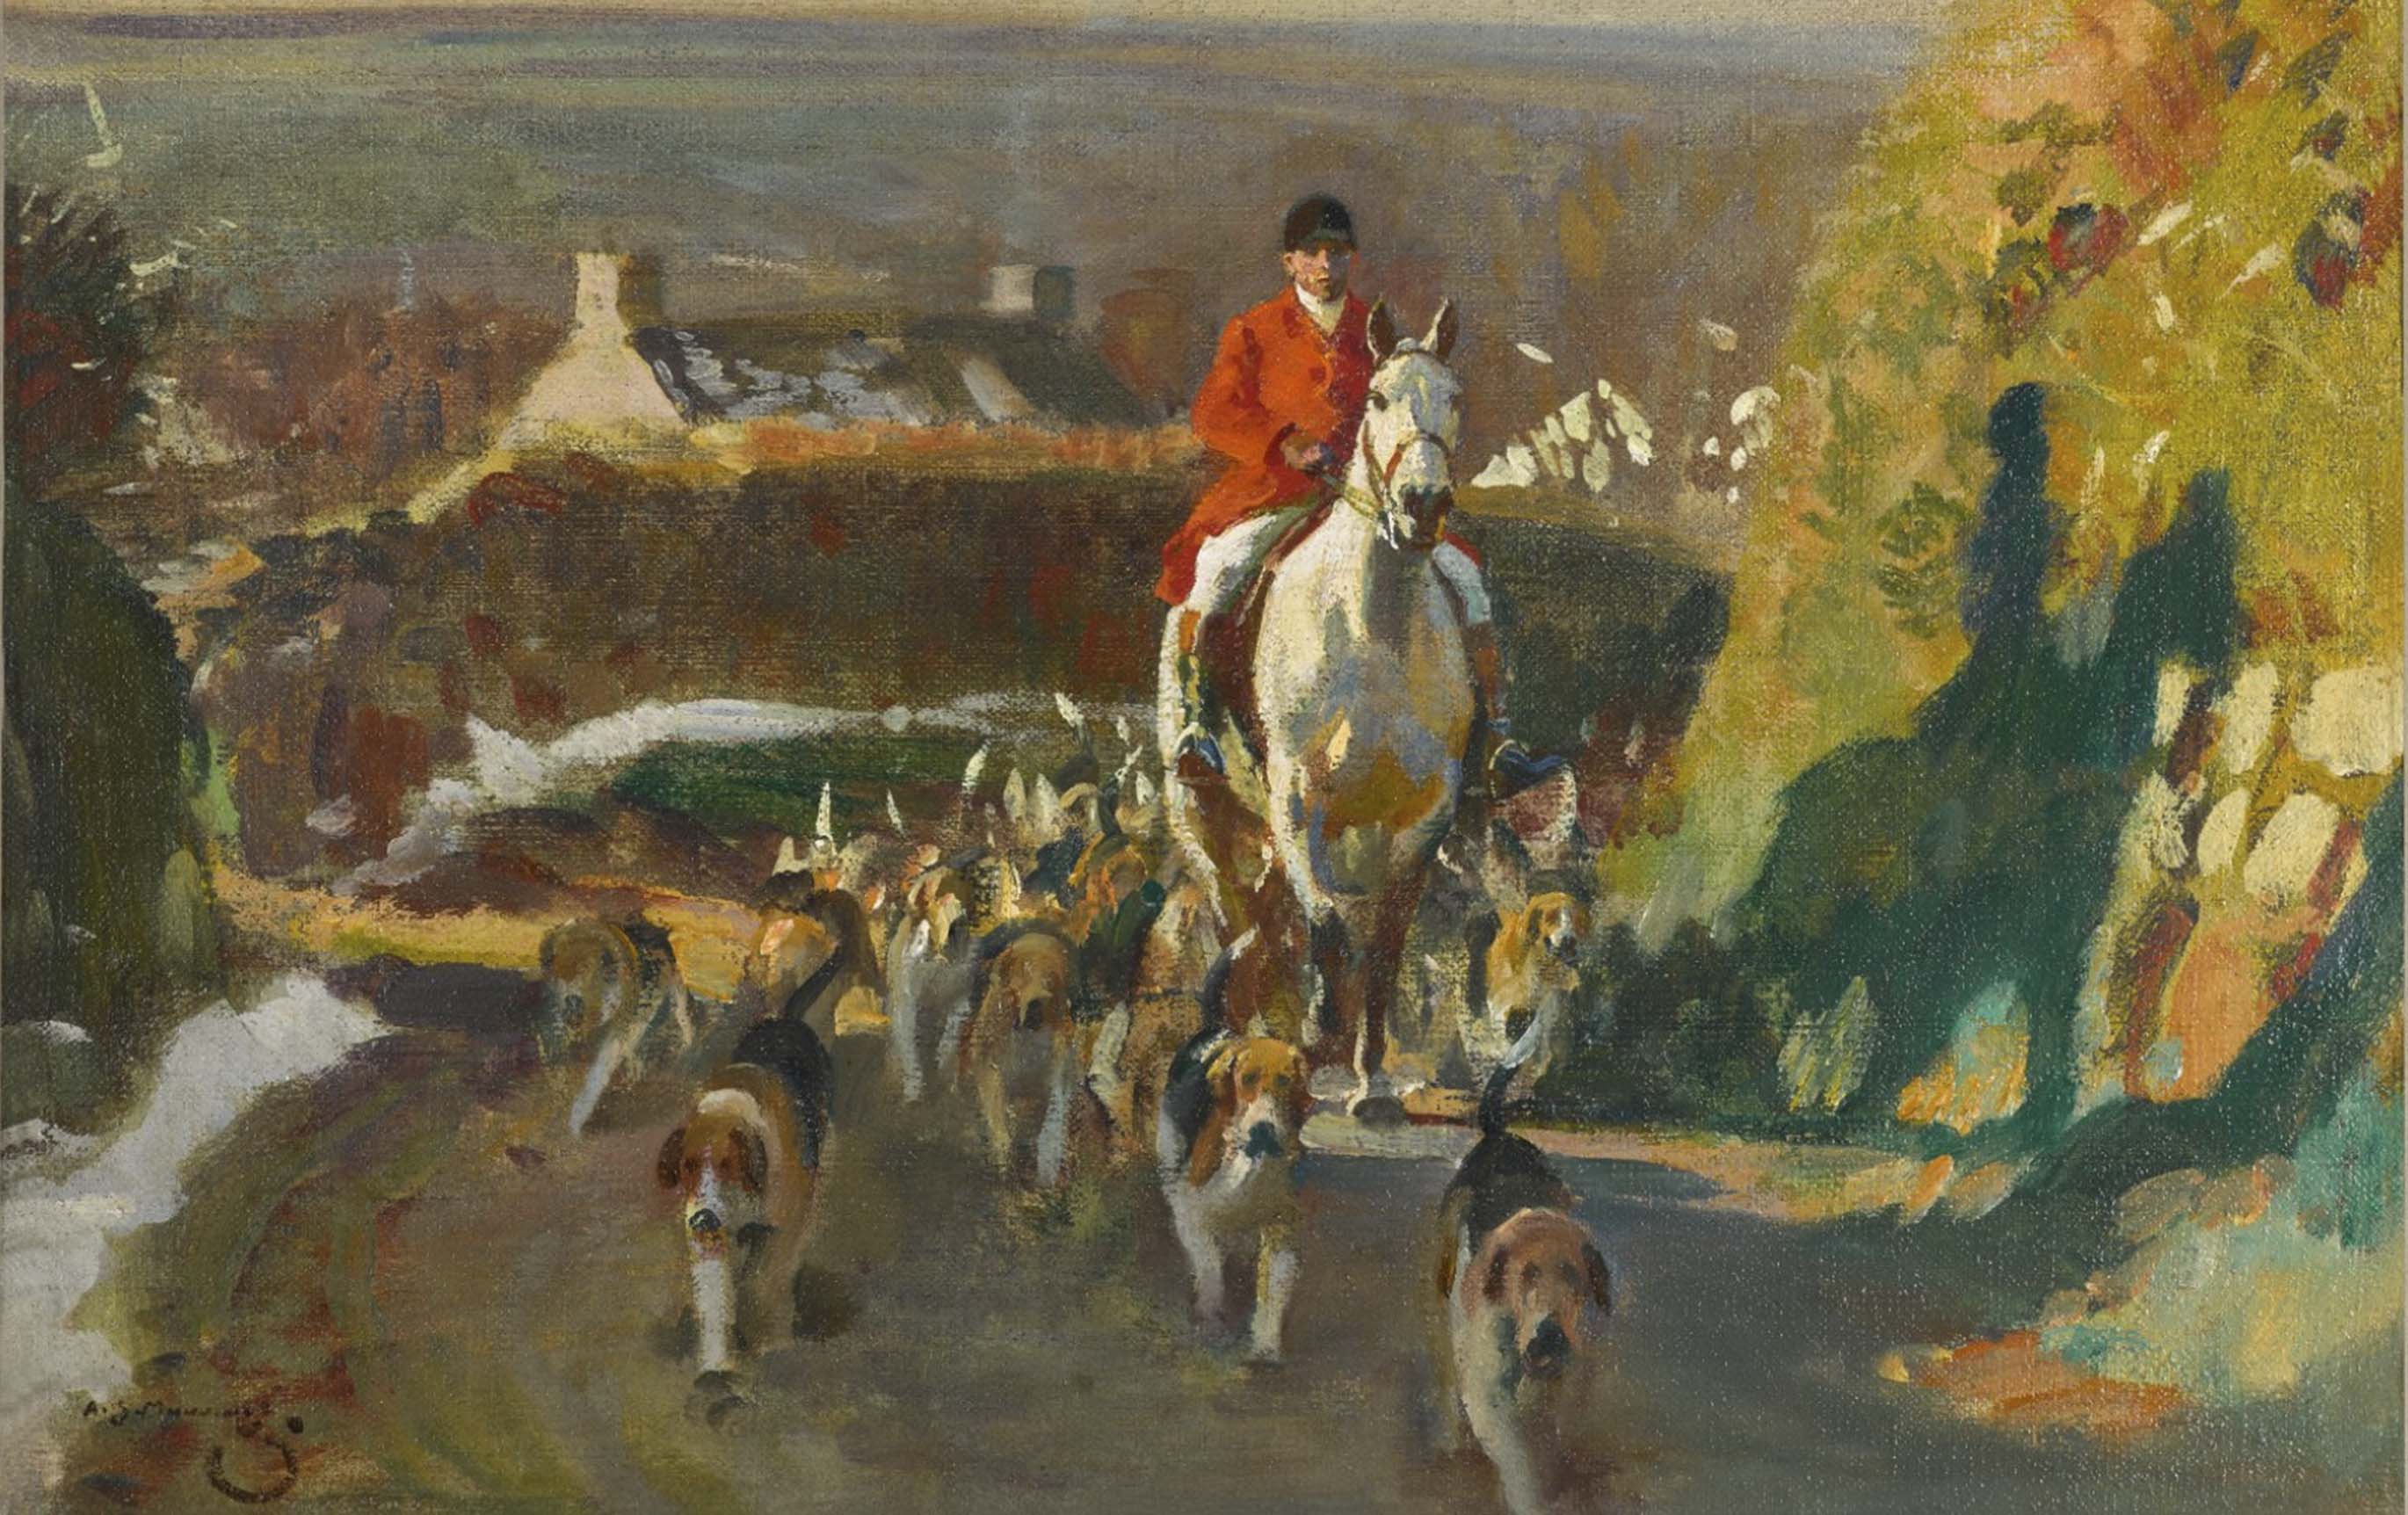 Sir Alfred James Munnings is renowned as one of the C20th’s greatest equestrian artists. Shown here is December Morning, painted in Cornwall, oil on canvas, 51cm x 61cm, £350,000.